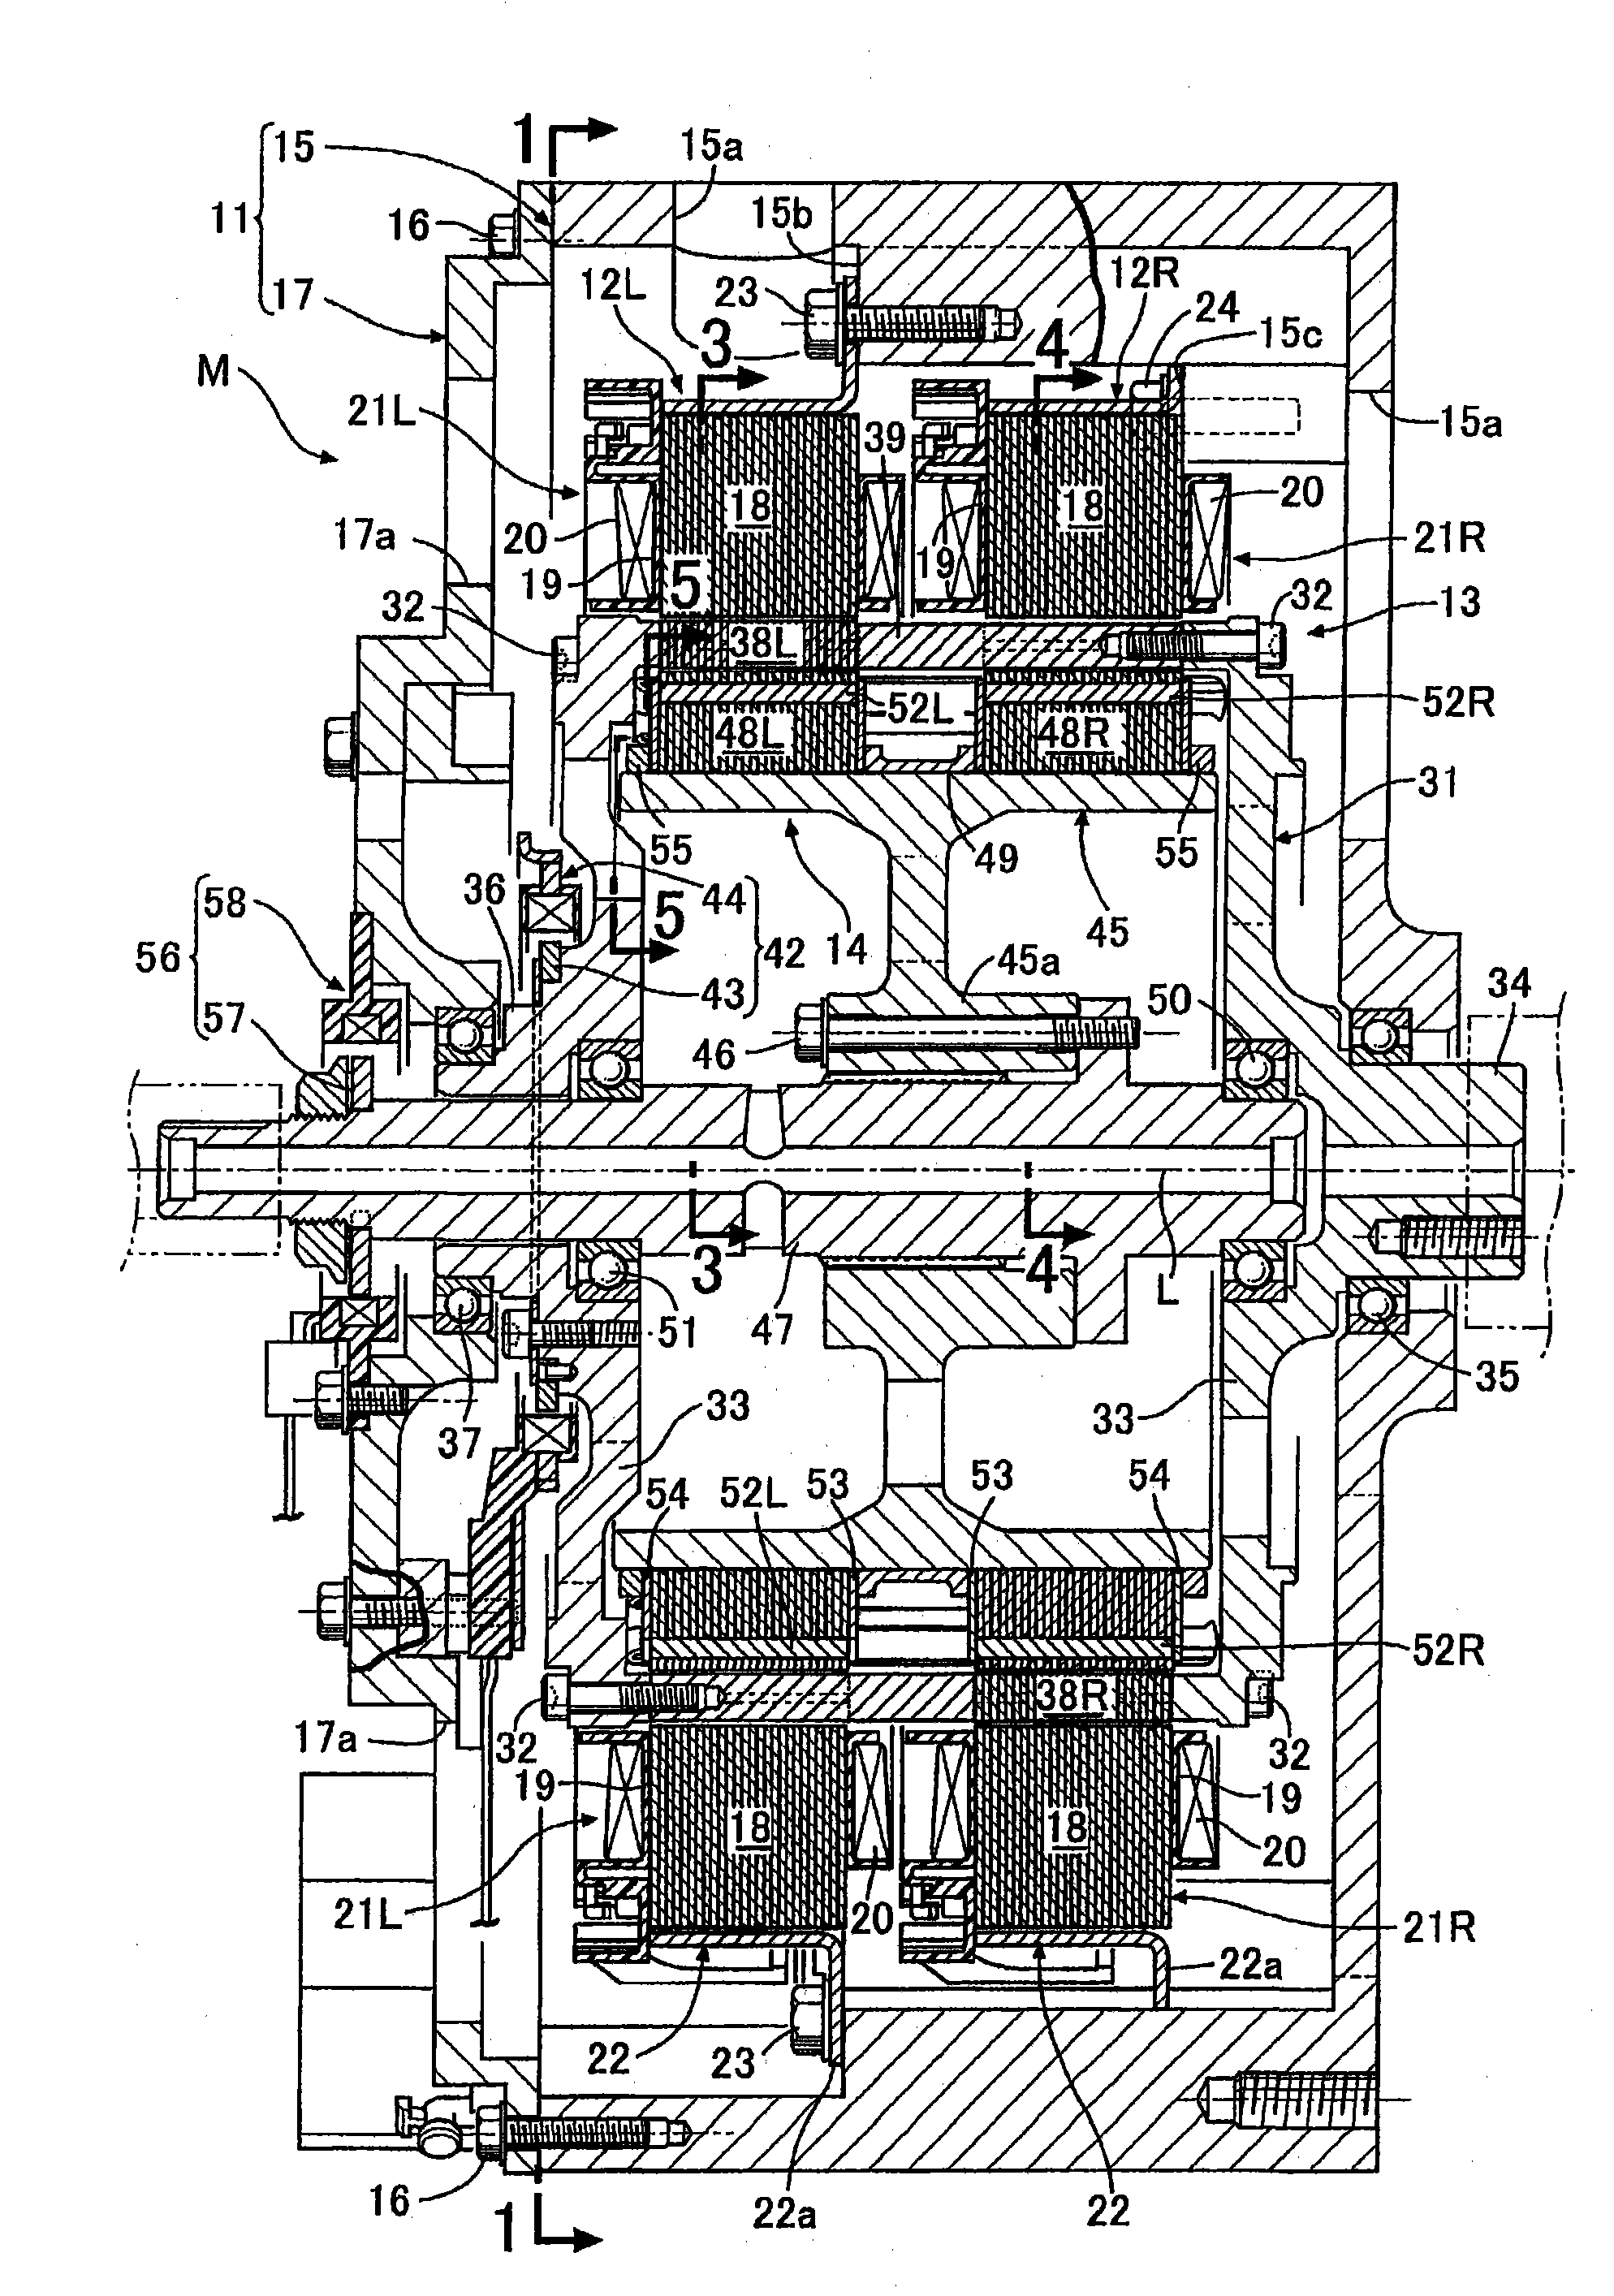 Motor and rotor for dynamo-electric machine